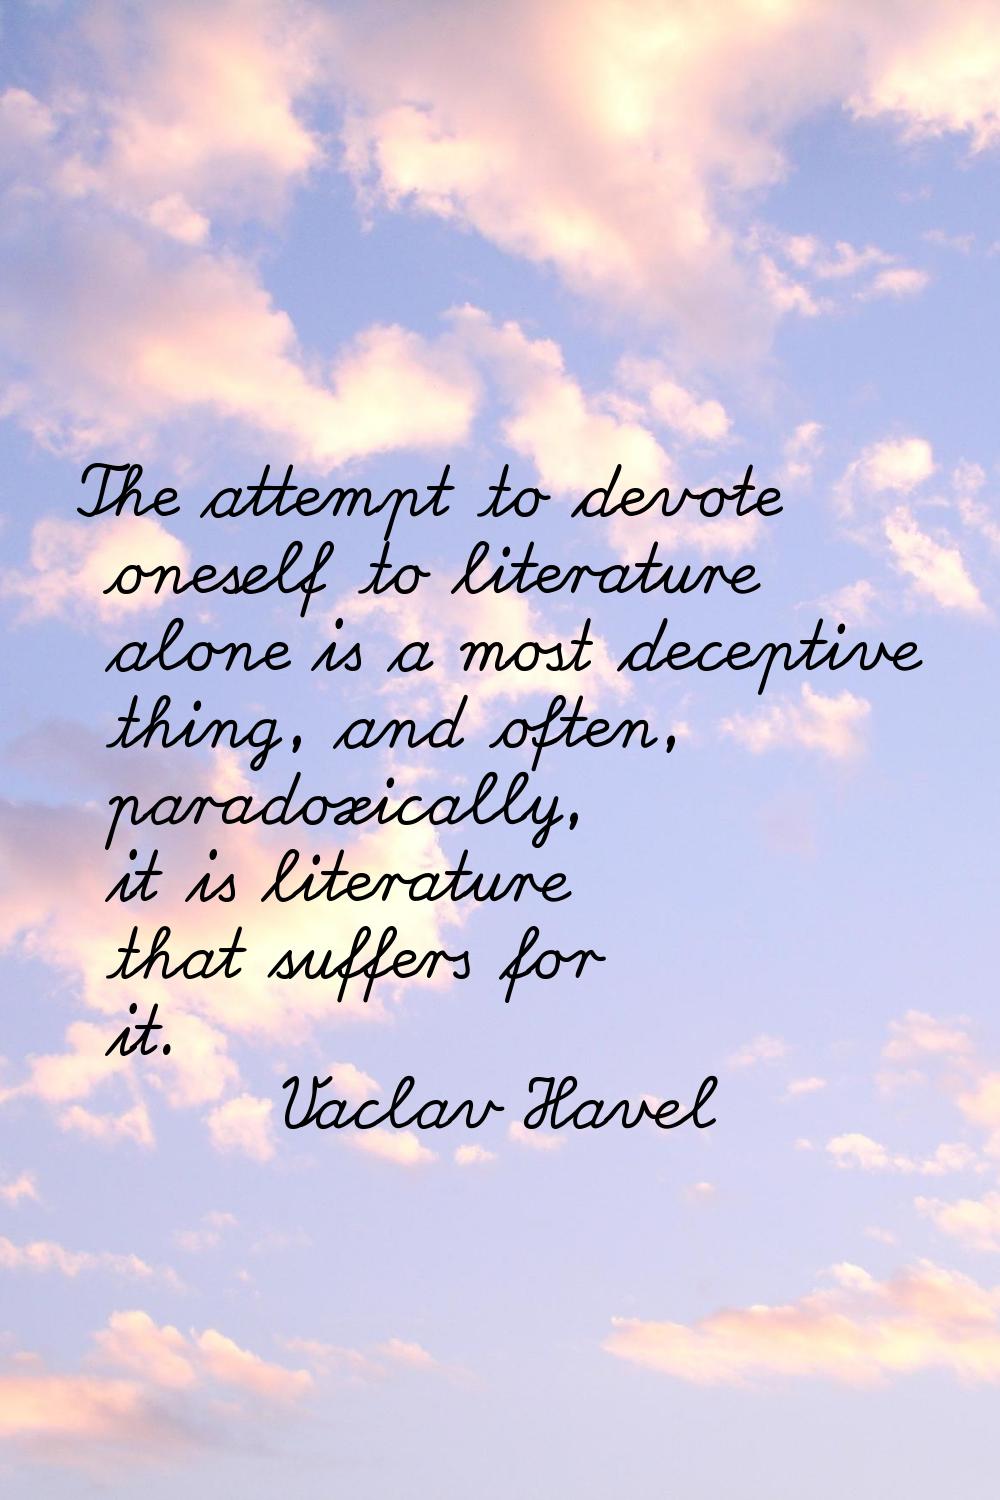 The attempt to devote oneself to literature alone is a most deceptive thing, and often, paradoxical